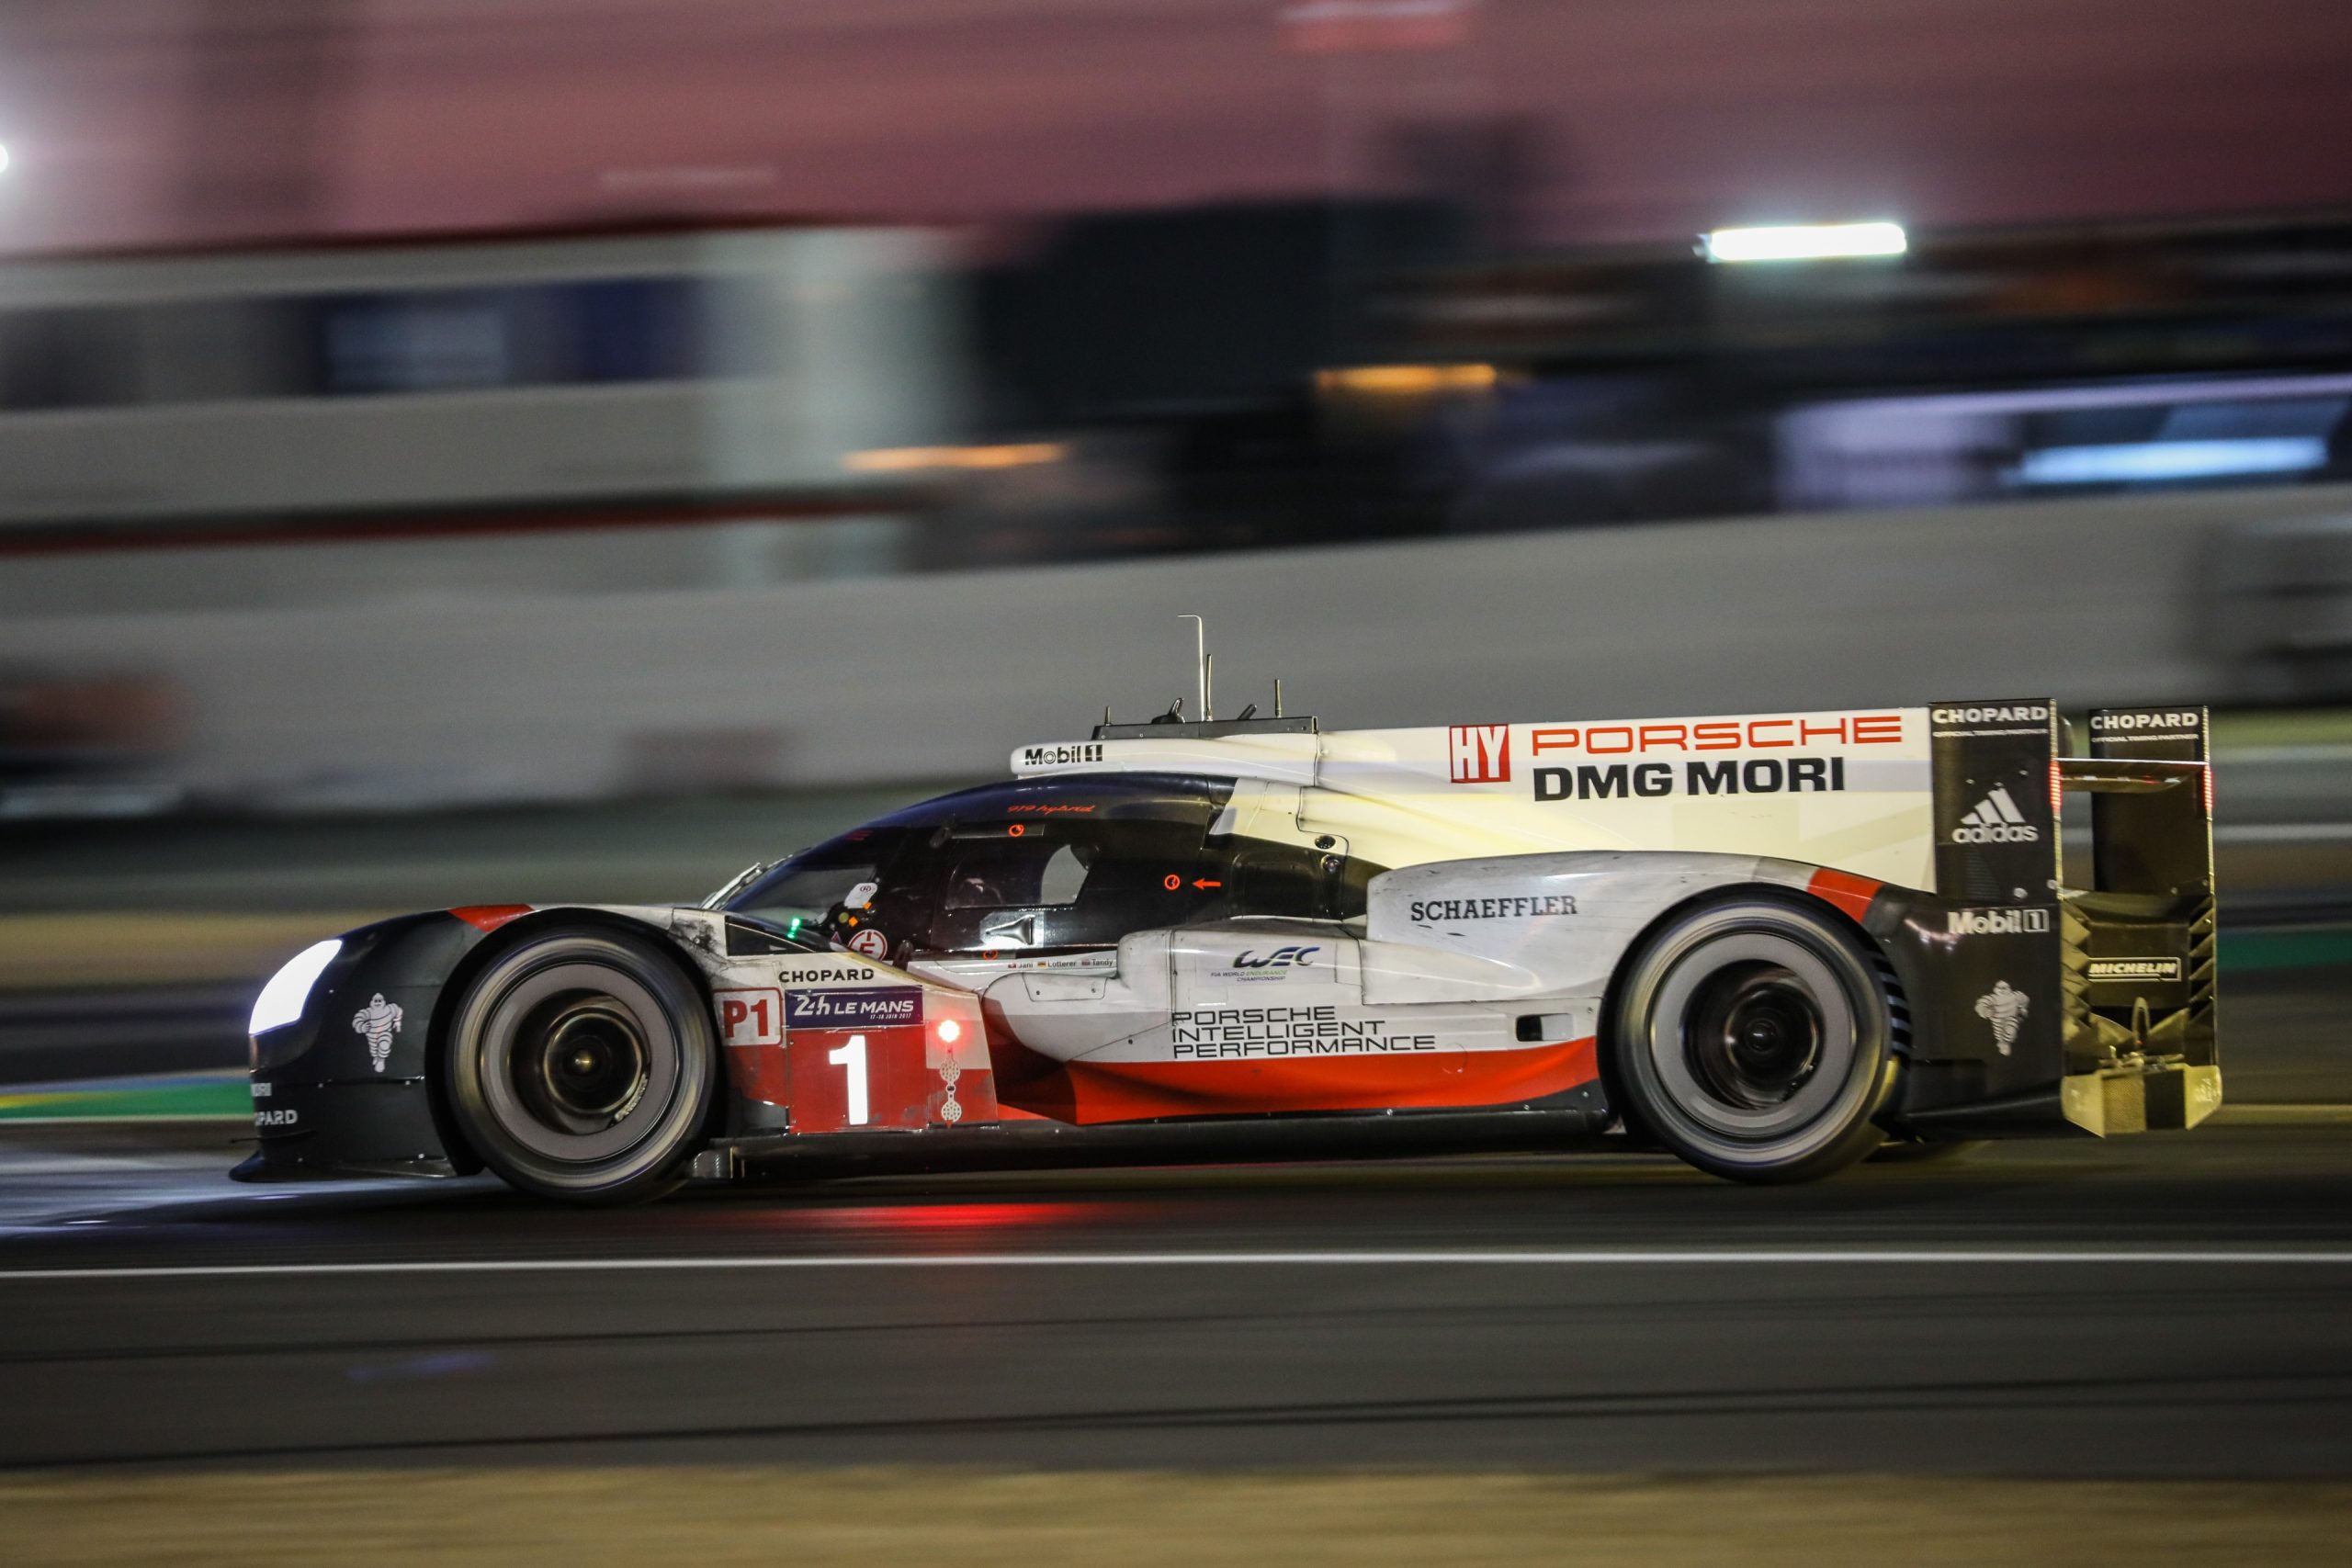 A profile view of a Porsche 919 LMP race car driving at night during the 2017 24 Hours of Le Mans race.